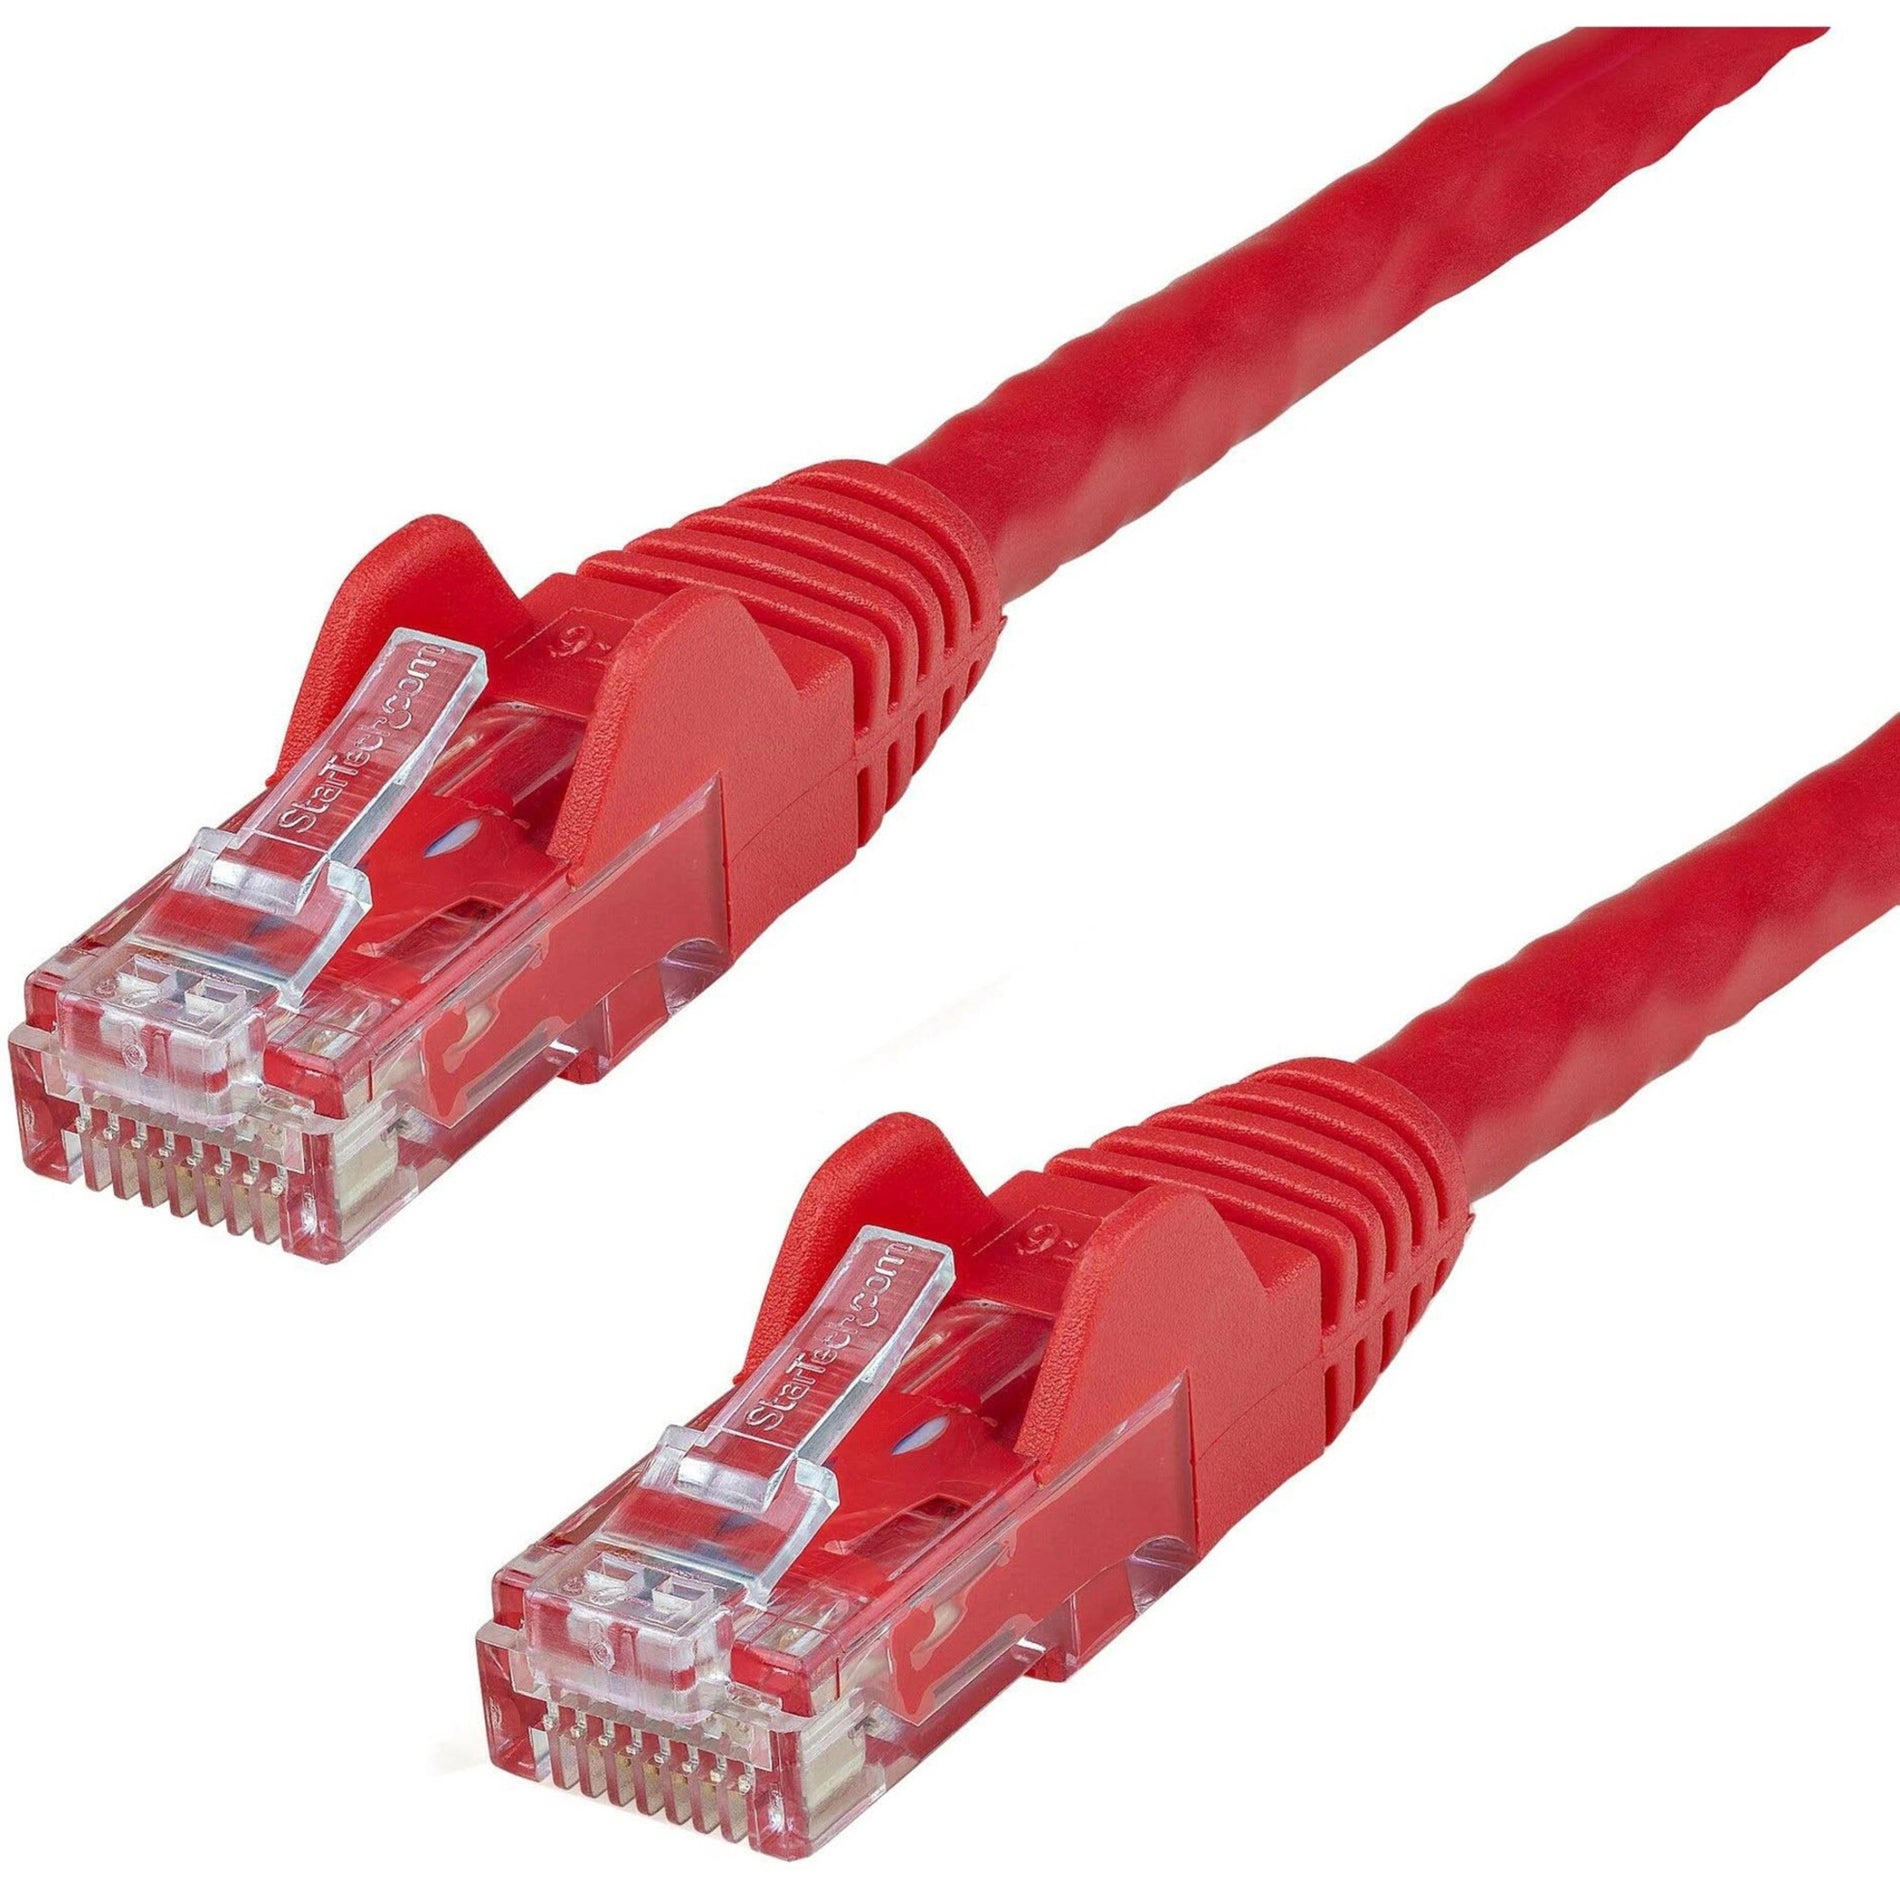 StarTech.com N6PATCH8RD Cat6 Patch Cable, 8 ft Red Ethernet Cable, Snagless RJ45 Connectors